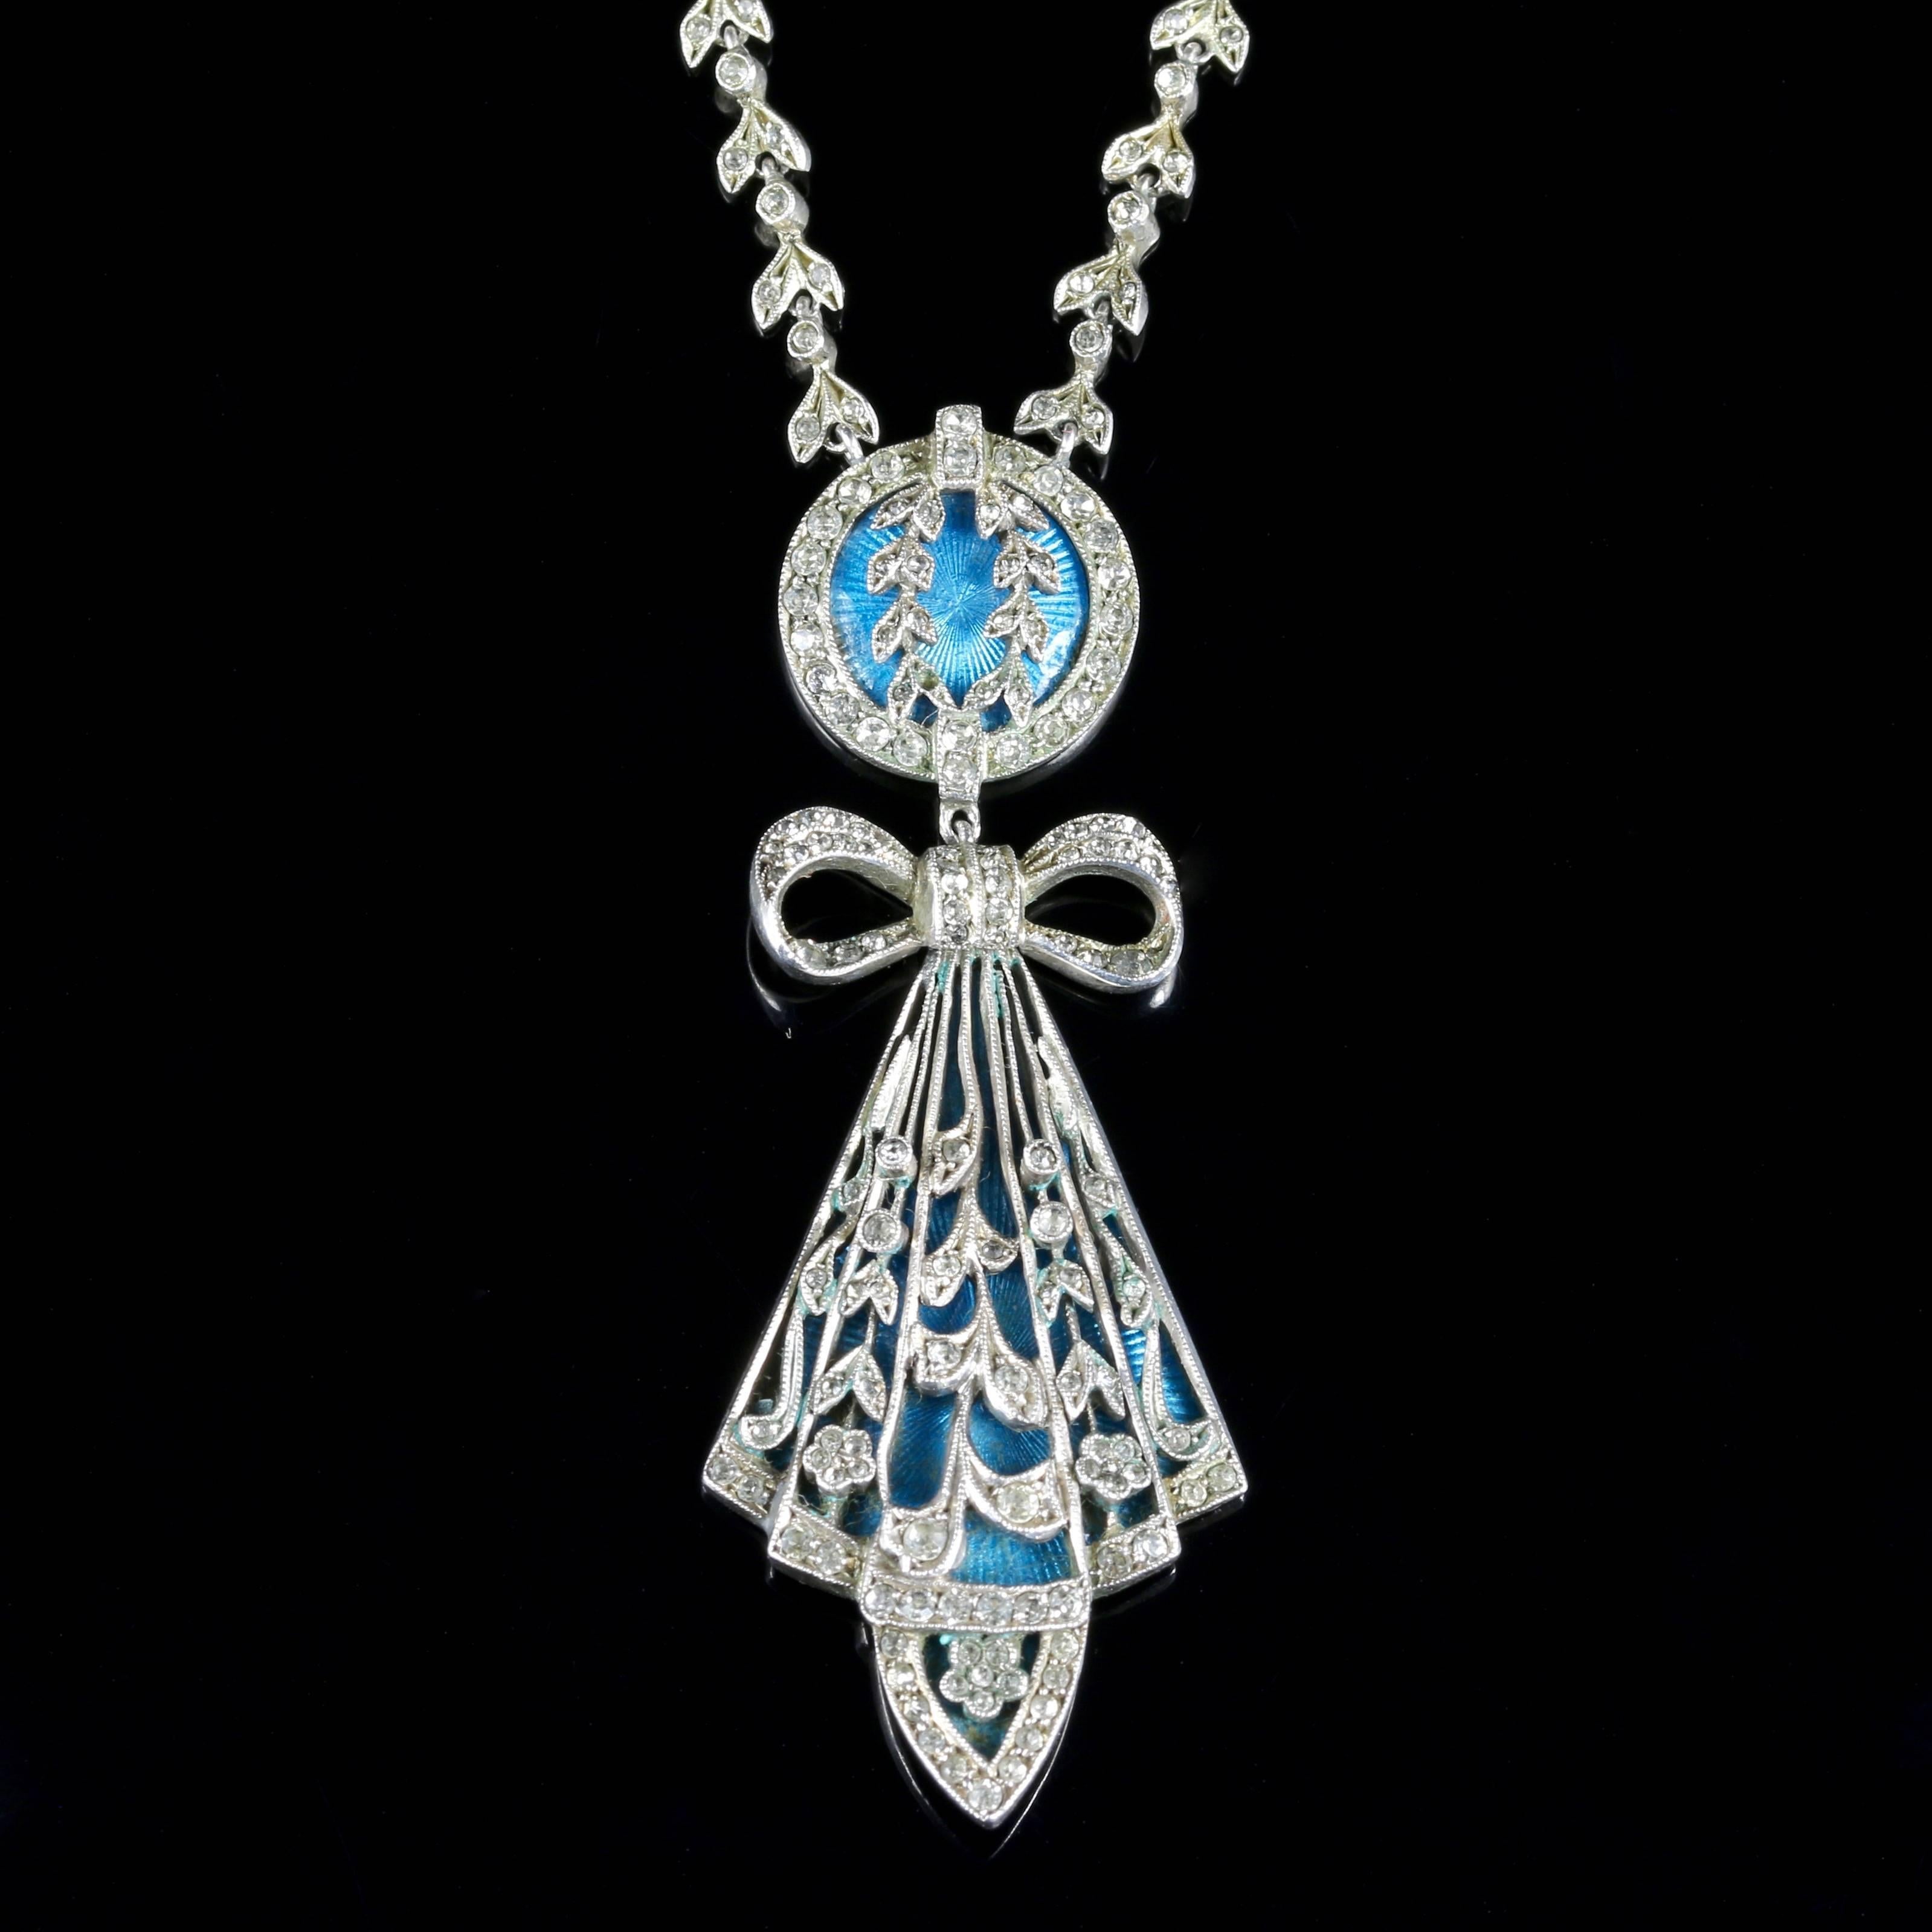 This very beautiful genuine Art Deco Sterling Silver necklace is set with beautiful blue enamel workmanship and Marcasite’s.

The bright turquoise enamelling colour strikes through the Silver workmanship, with a central Marcasite bow and deco